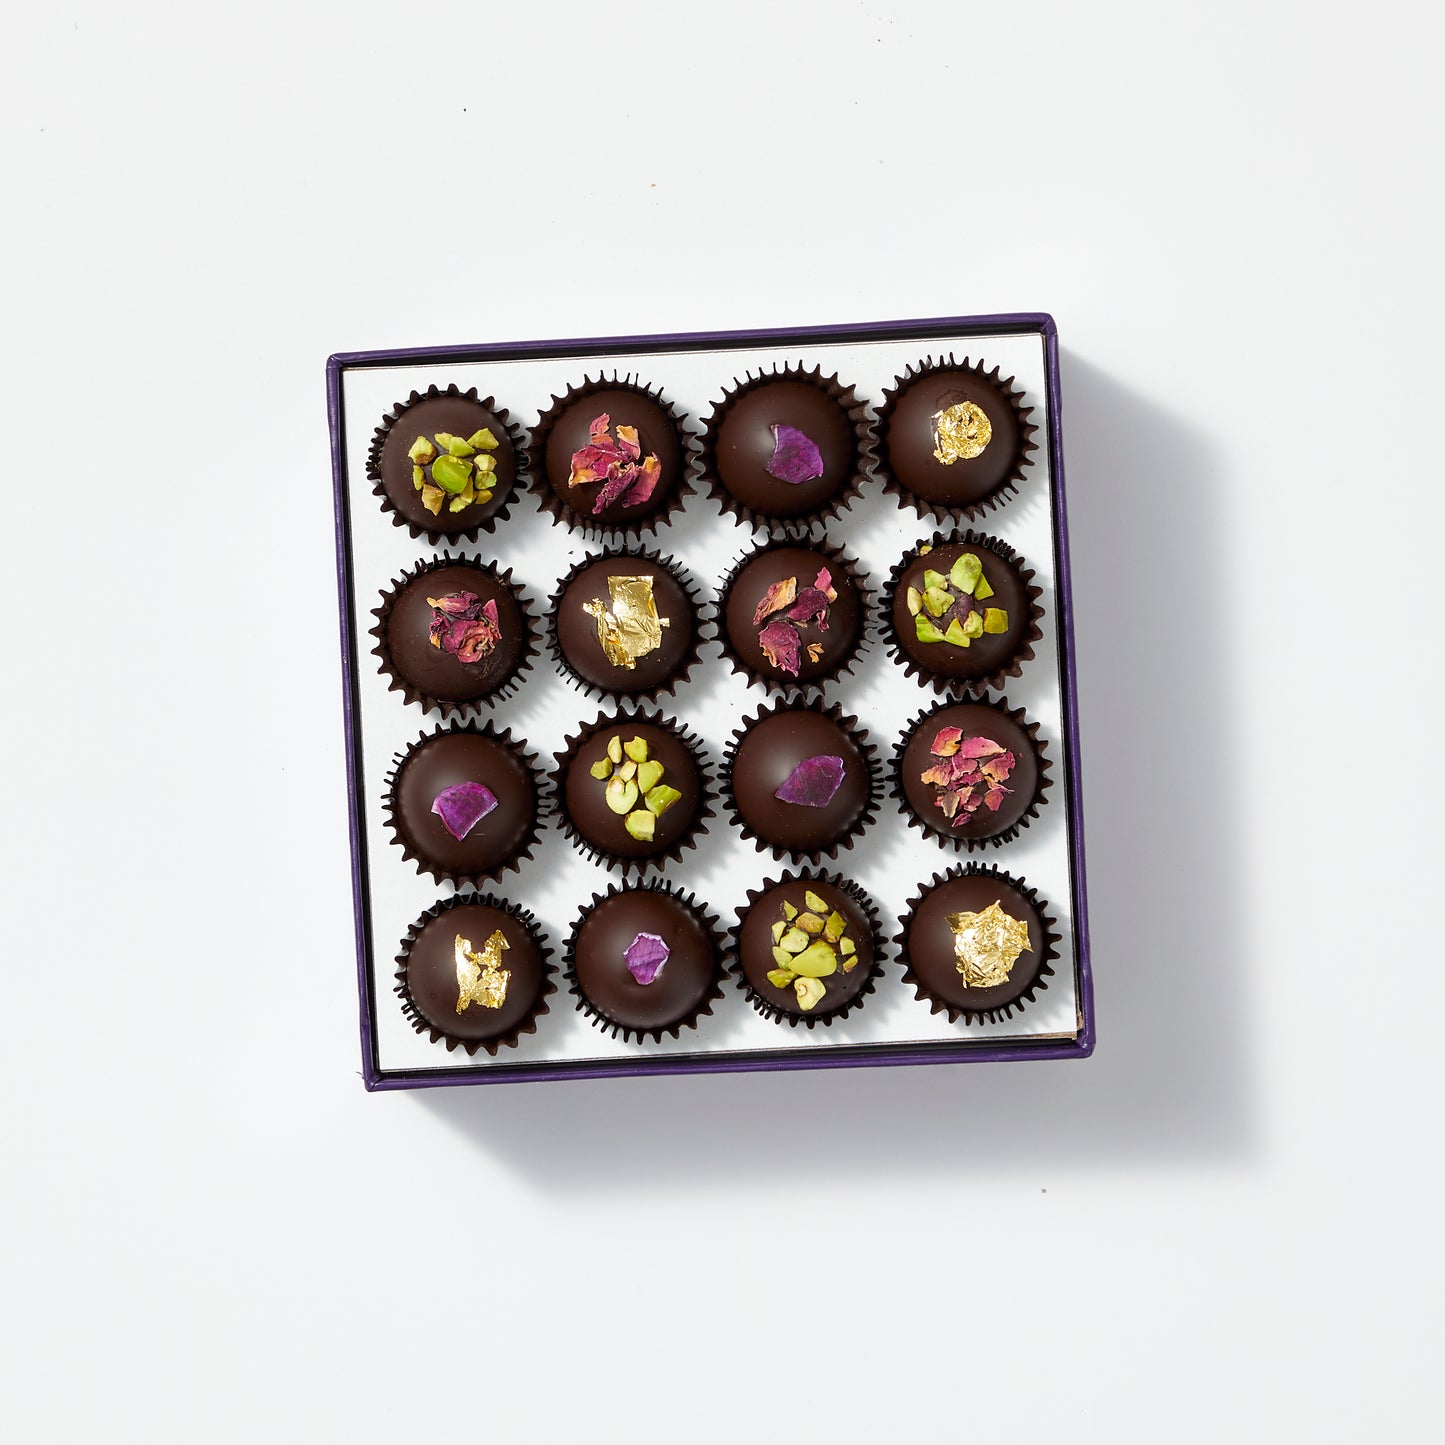 High-Phenolic Olive Oil and Dark Chocolate Vegan Truffle Collection, 16 pieces